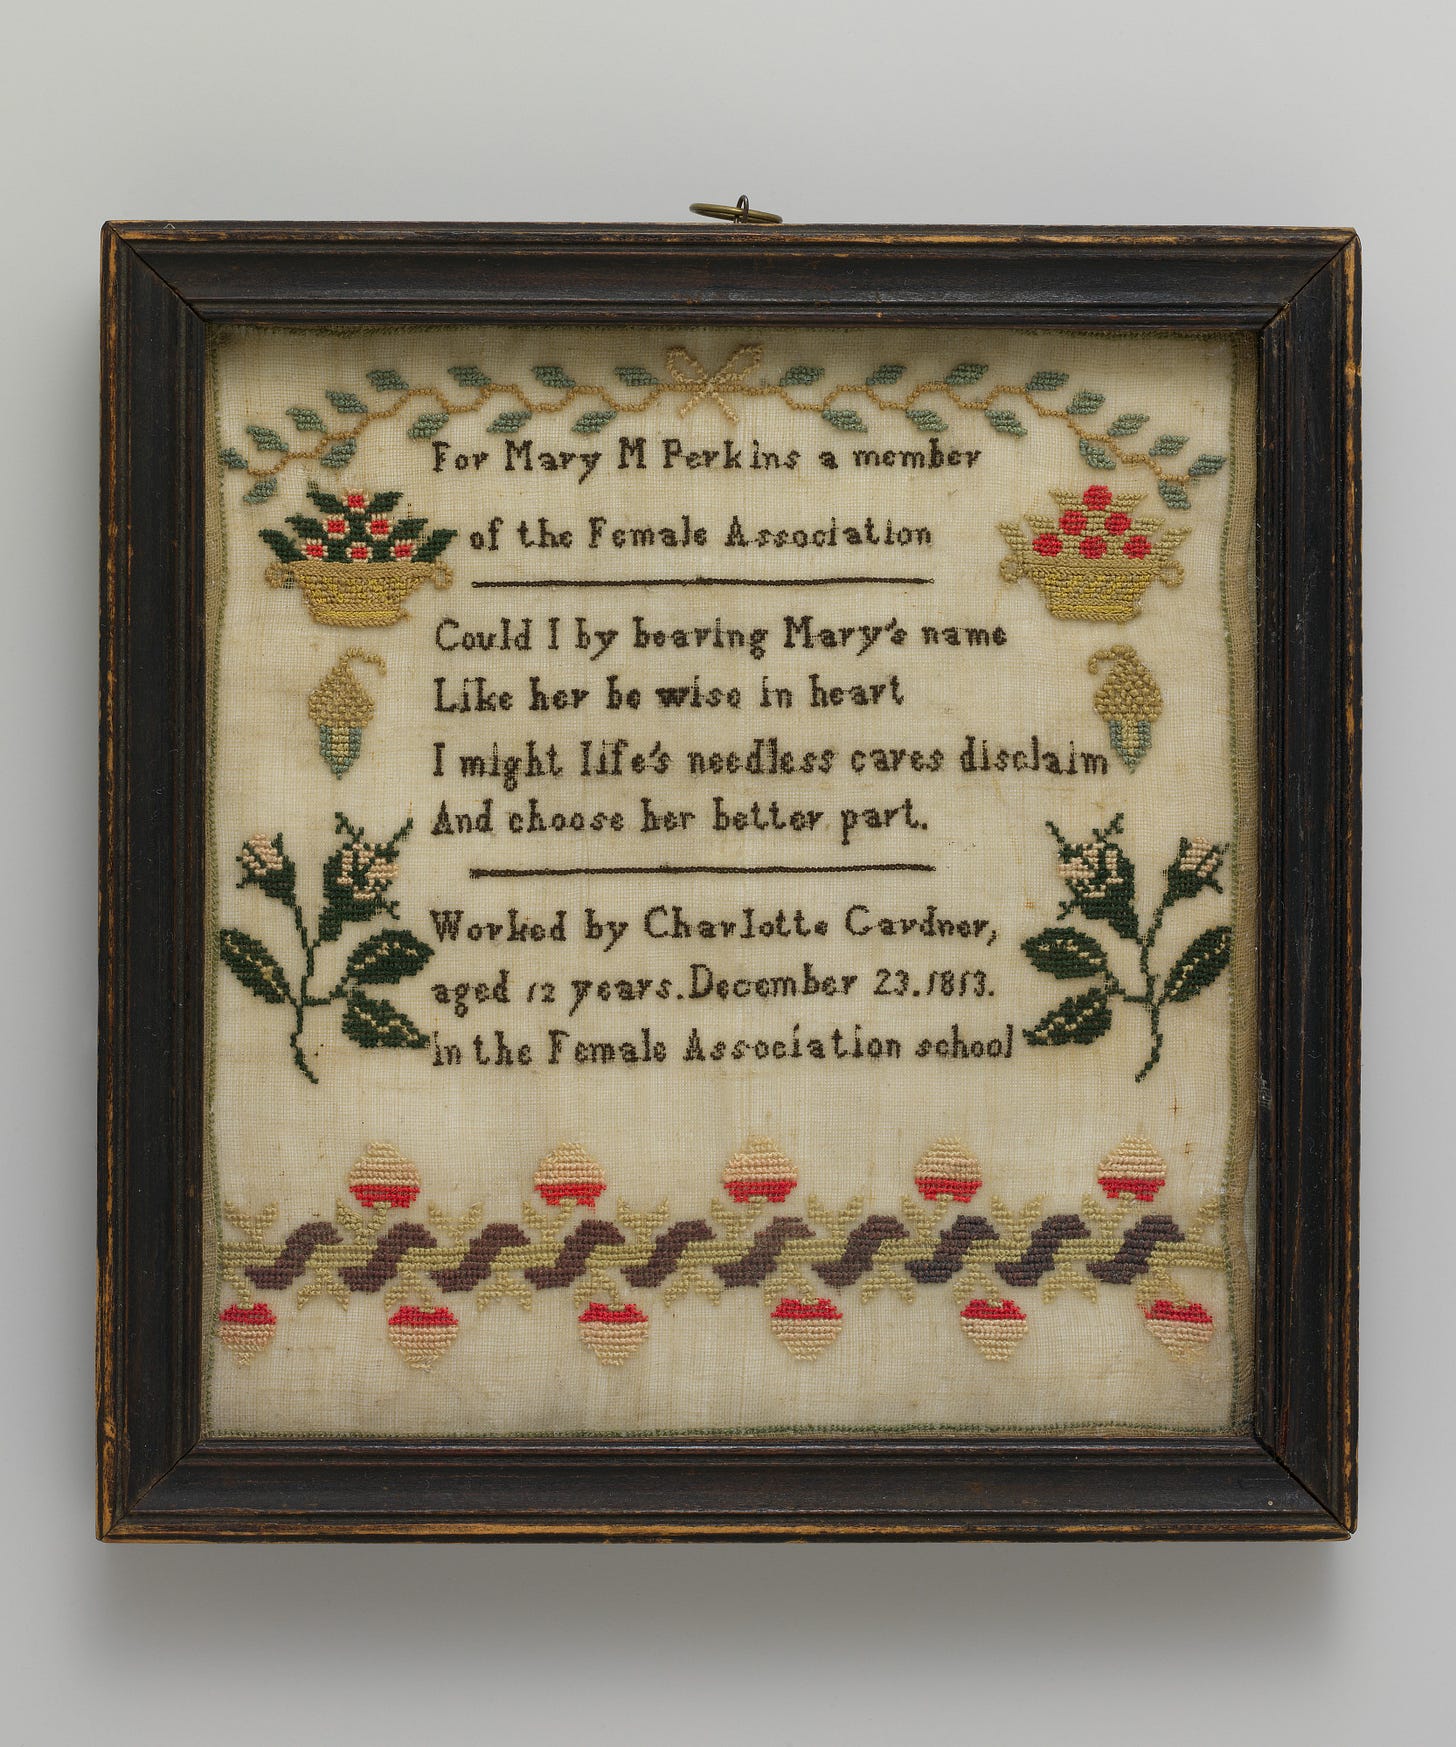 Elaborately embroidered sampler reading: "For Mary M Perkins a member of the Female Association. Could I by bearing Mary's name Like her be wise in heart I might life's needless cares disclaim And choose her better part. Worked by Charlotte Gardner, aged 12 years. December 23, 1813. in the Female Association school."